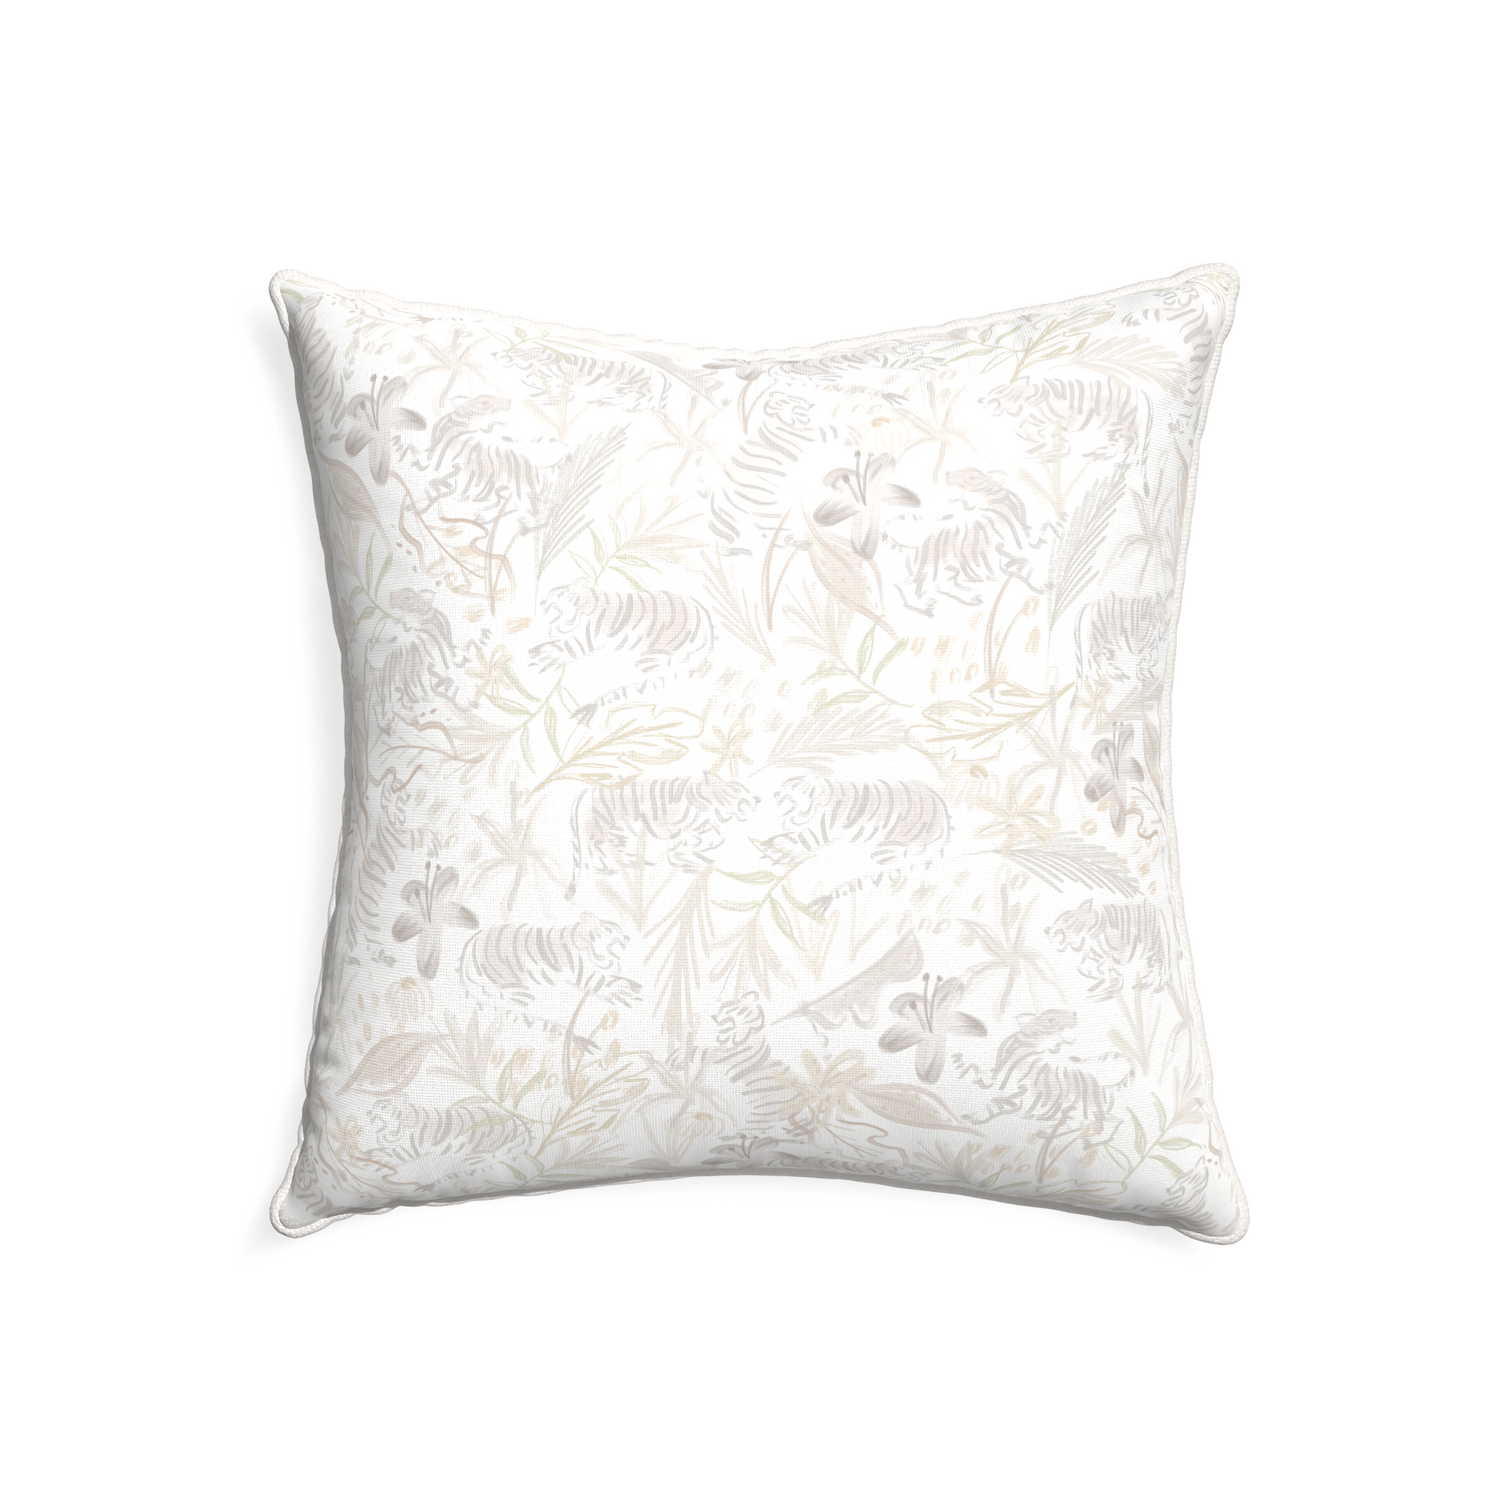 22-square frida sand custom beige chinoiserie tigerpillow with snow piping on white background